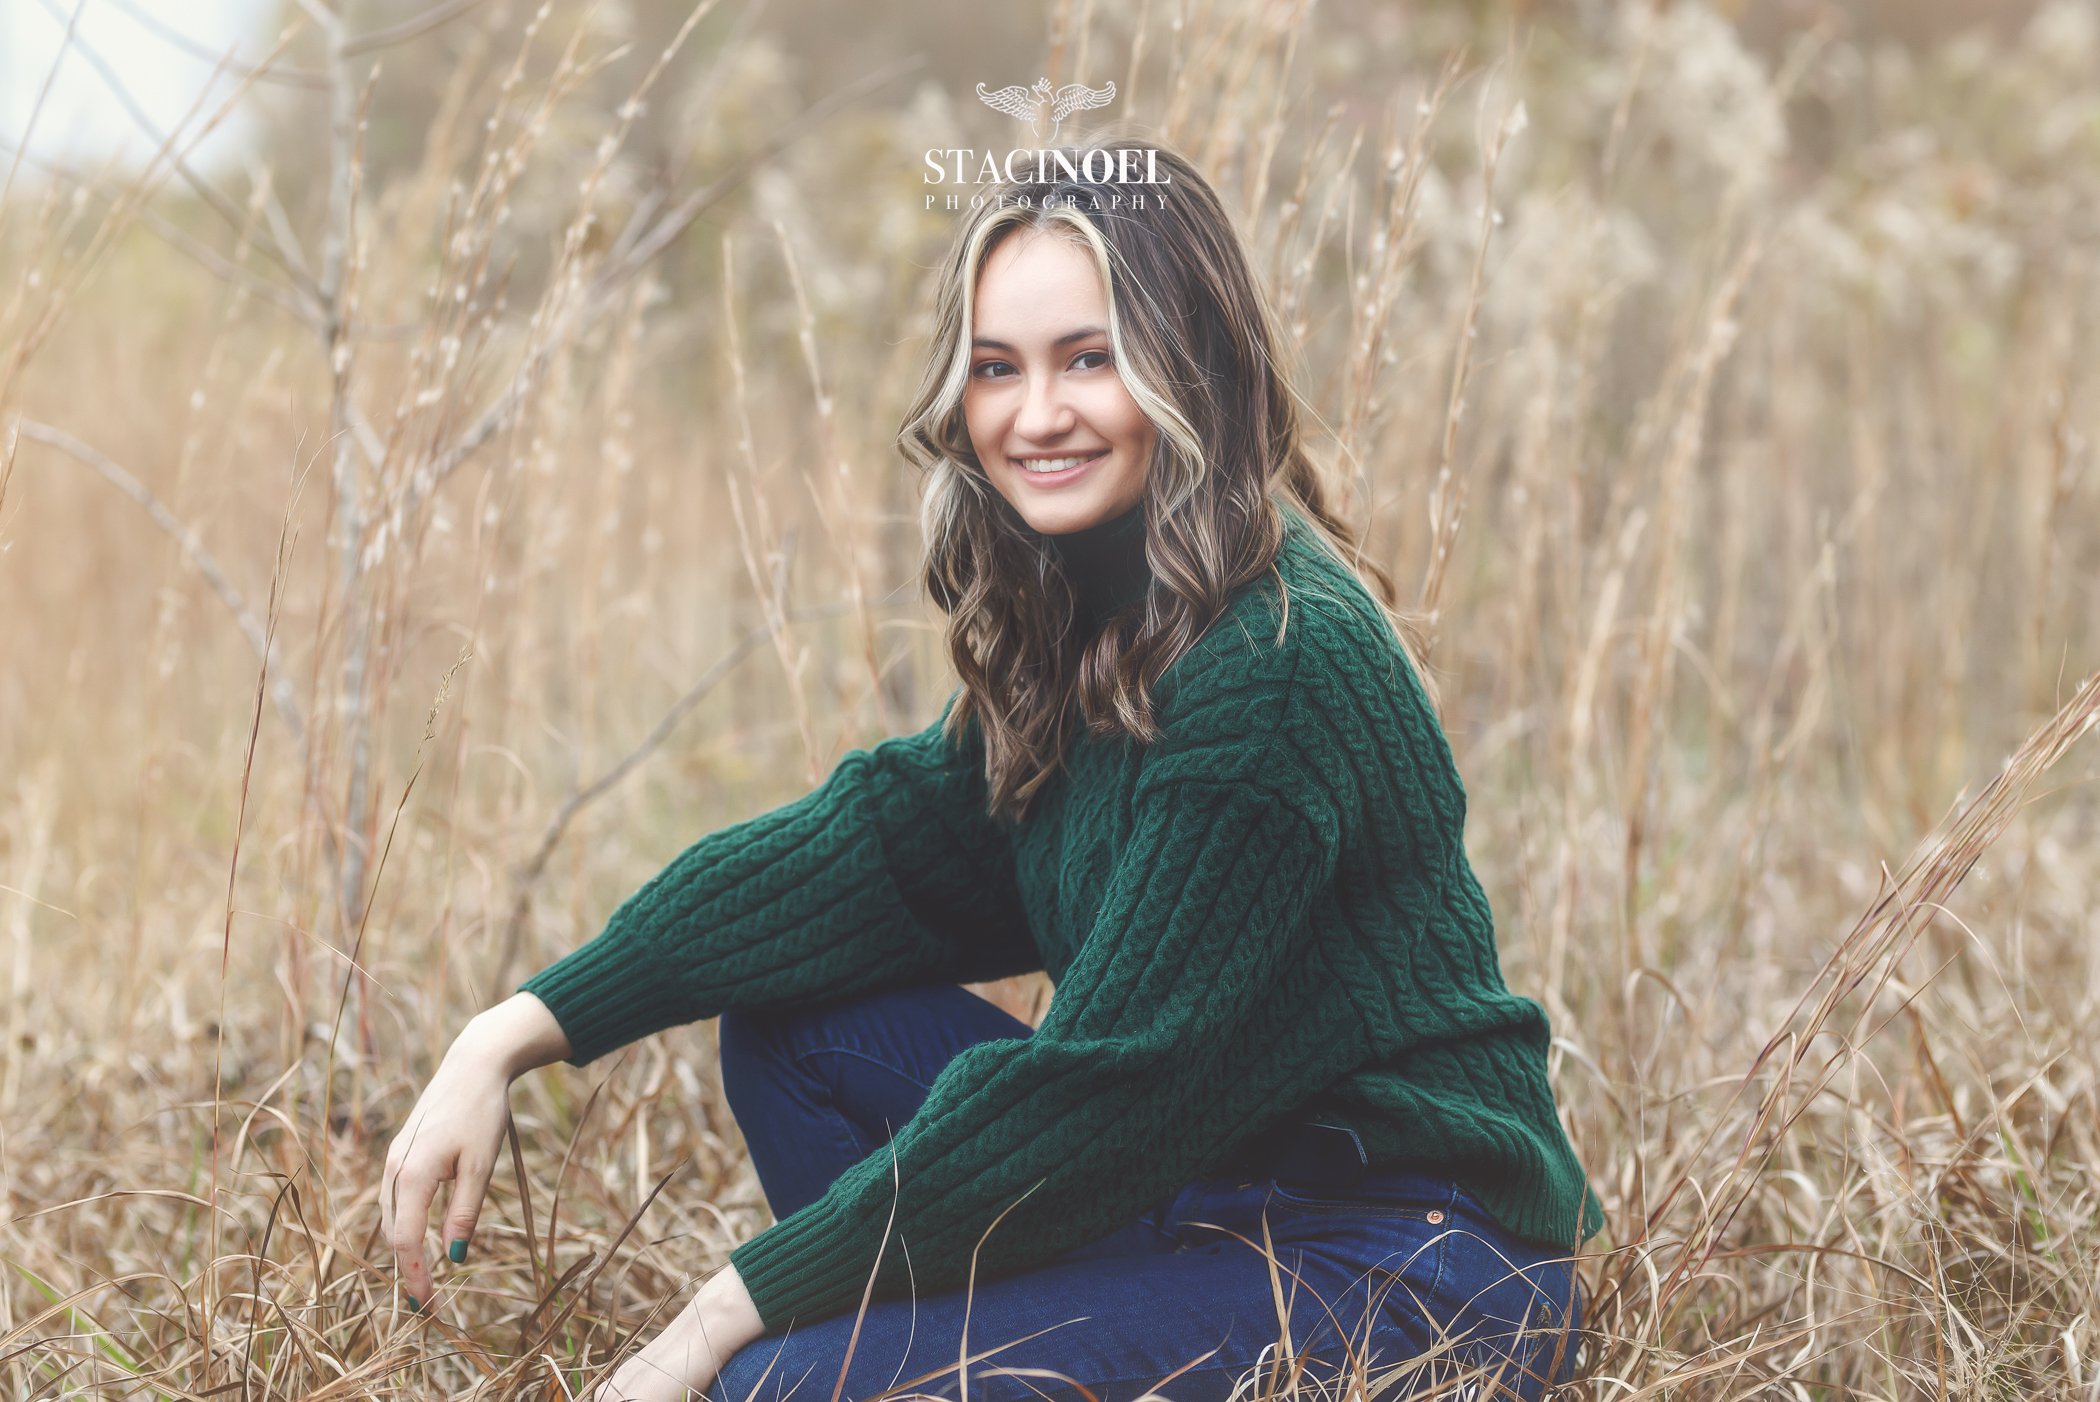 Charlotte senior photographer Staci Noel photography captures a fall senior session in tall grass with autumn colors and high school senior girl in beautiful outdoor setting